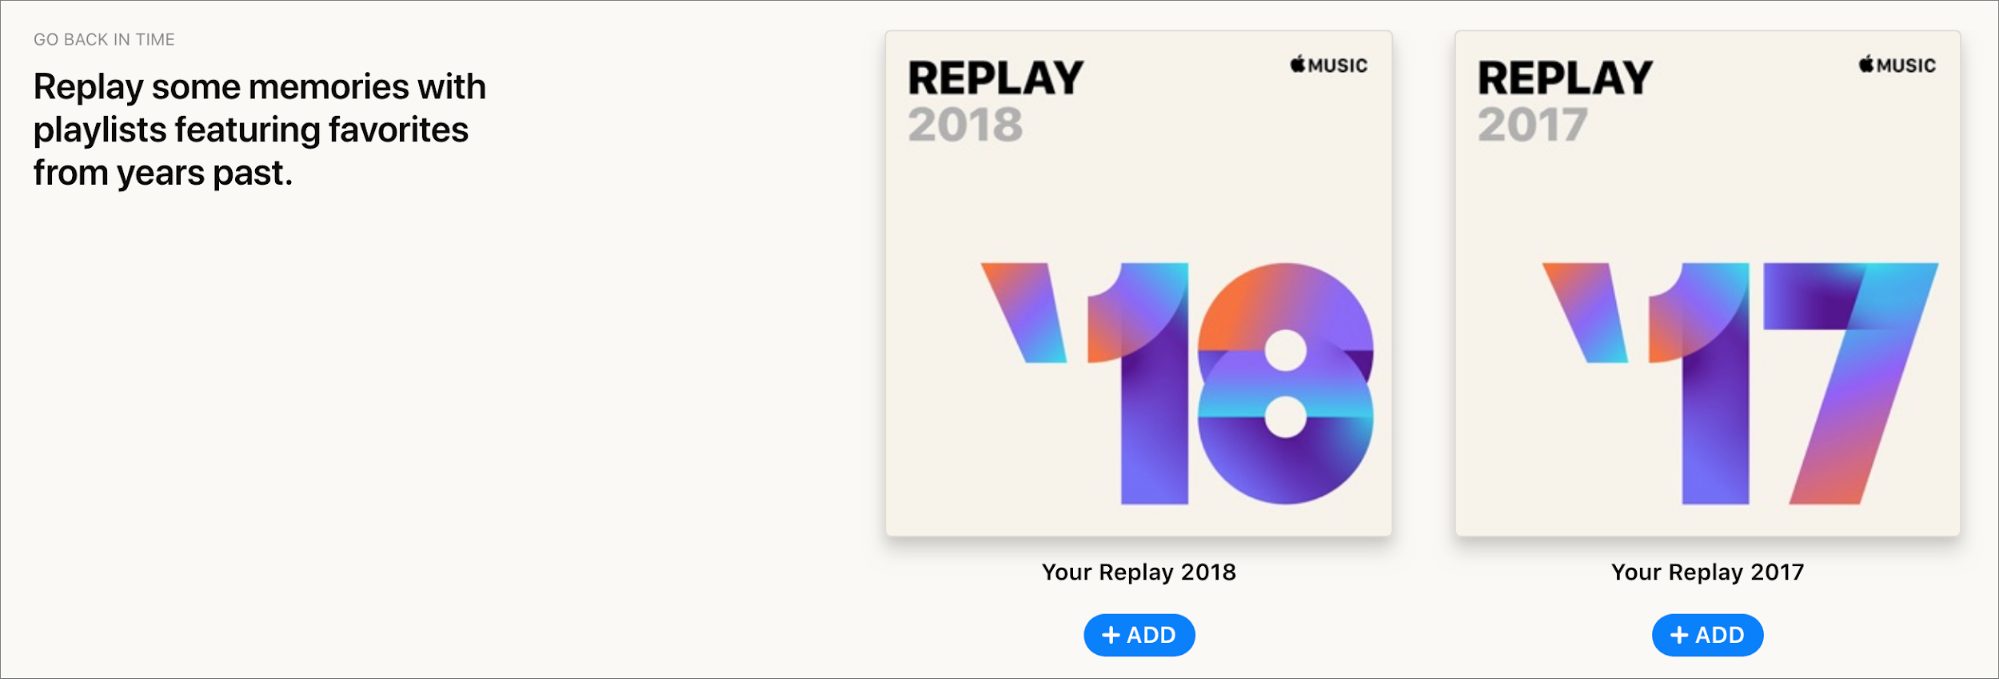 Replay playlists for 2017 and 2018